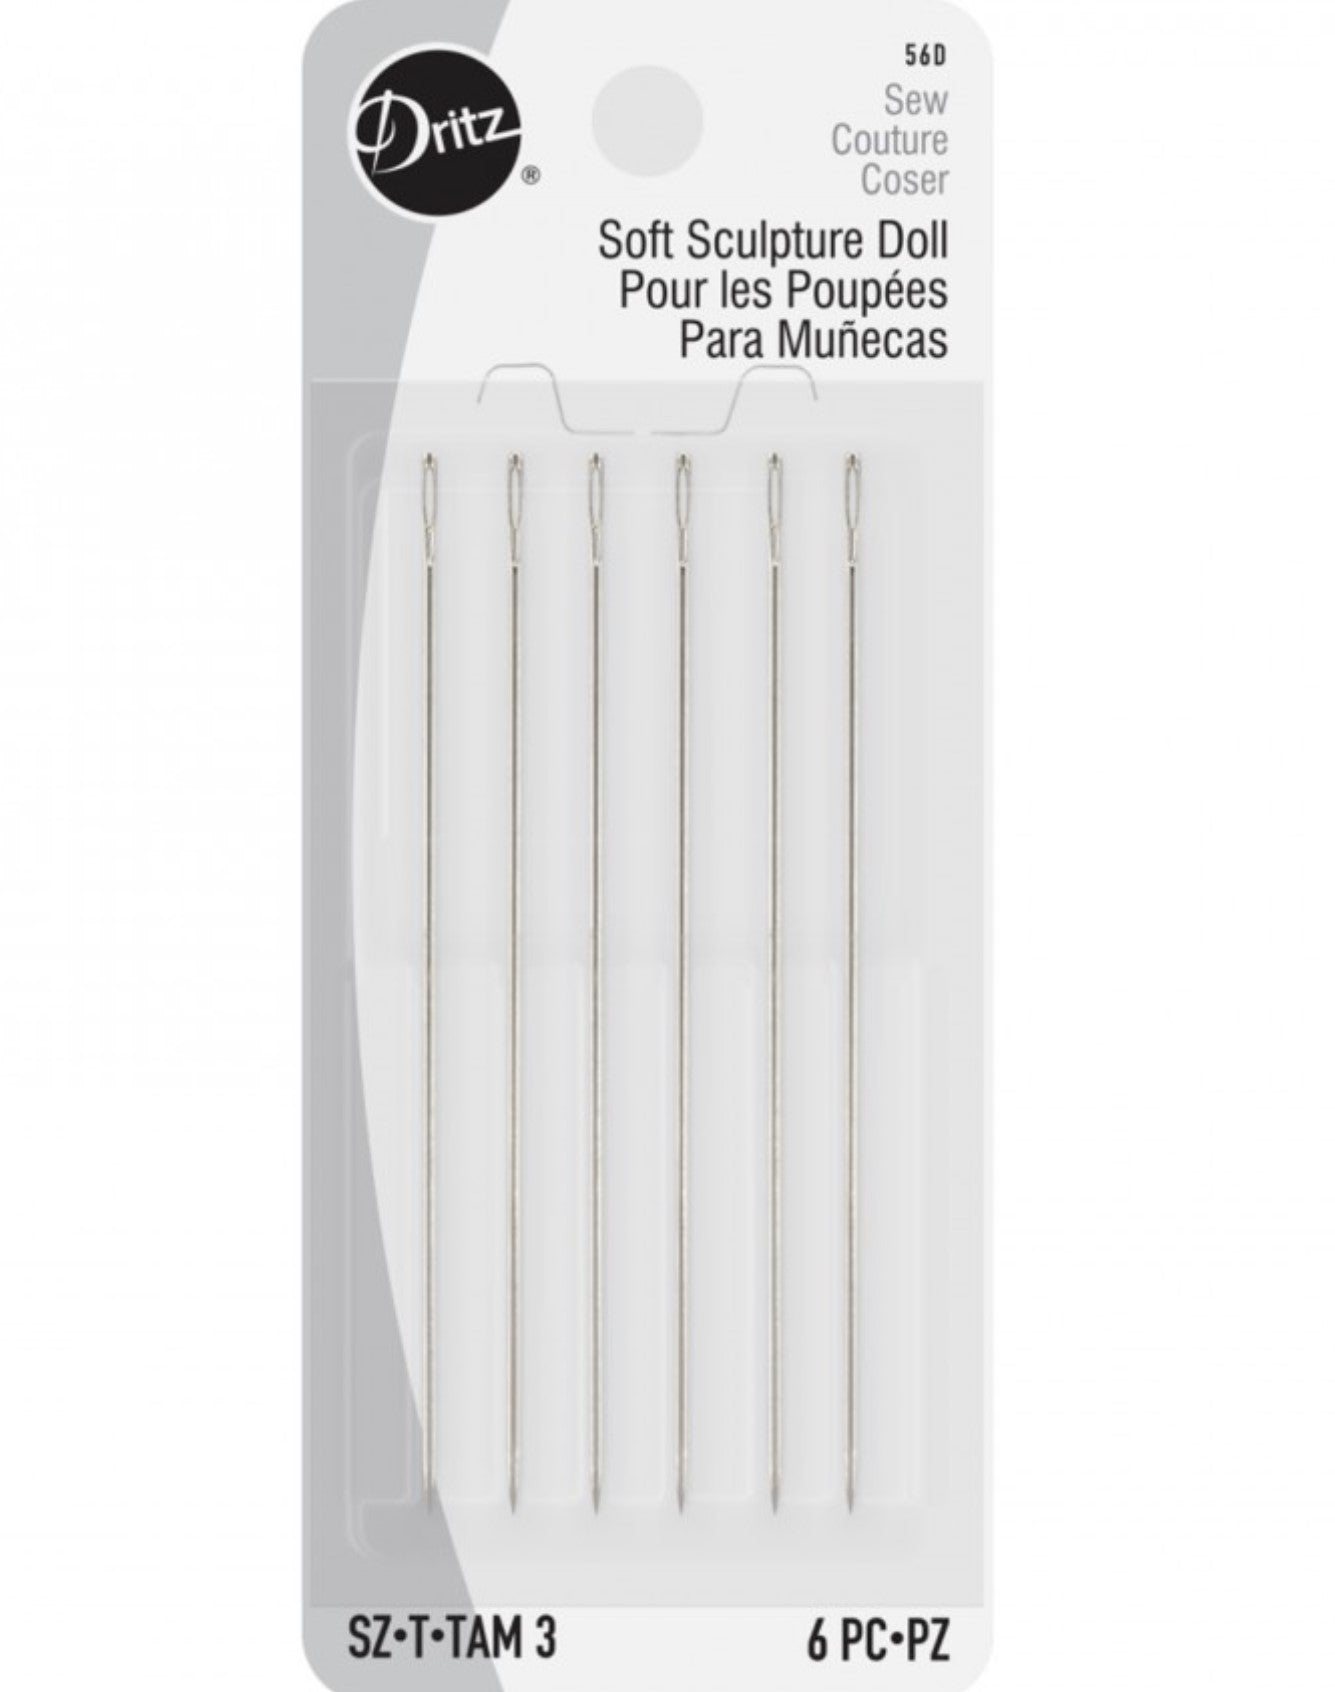 Doll - Soft Sculpture Hand Sewing Needles - Ref. 56D by Dritz®